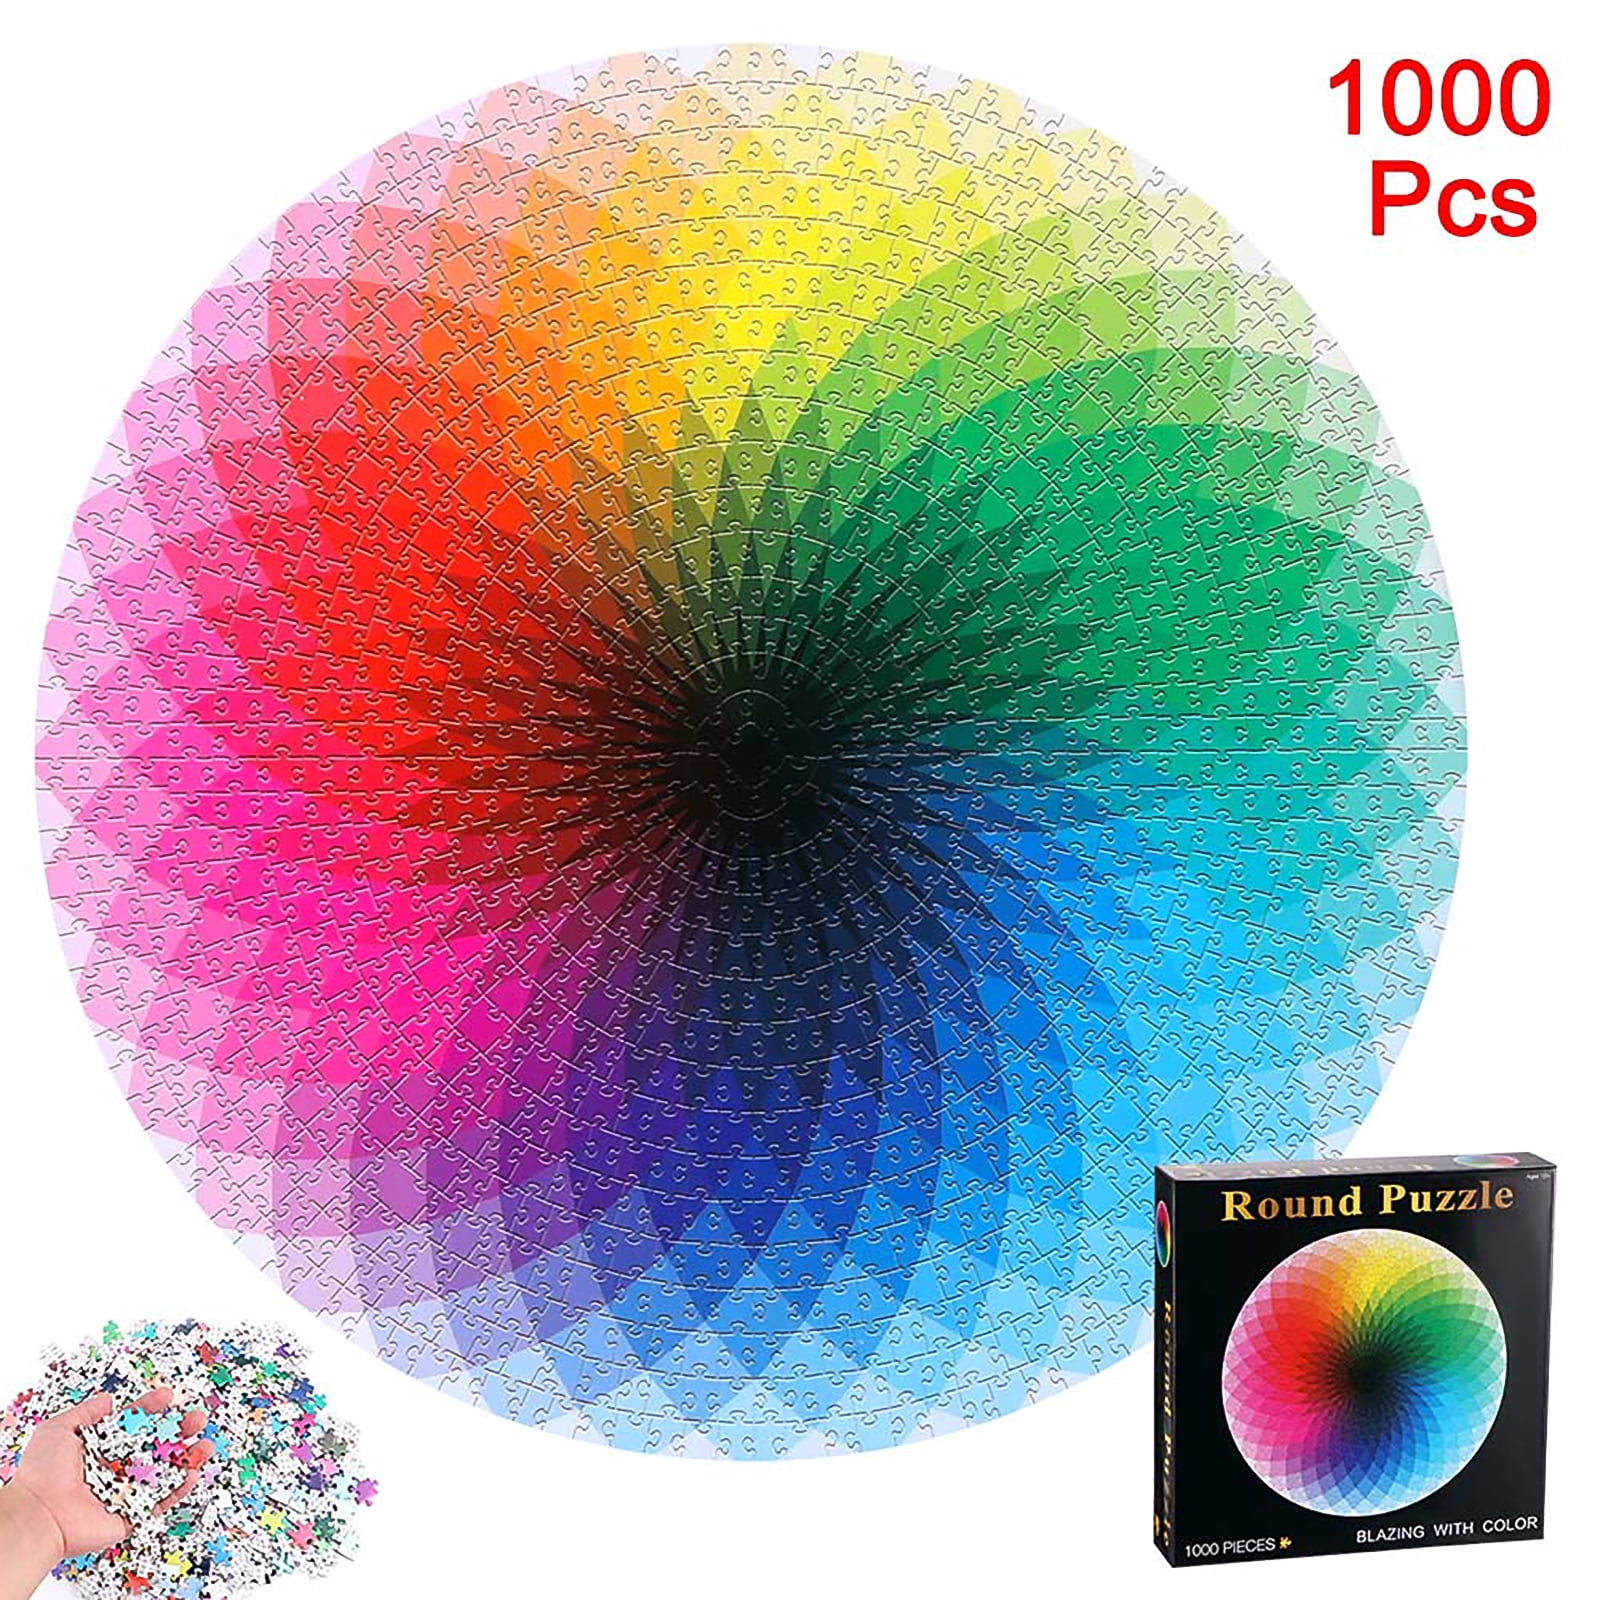 1000 Piece Kids Adults Cardboard Colorful Round Jigsaw Rainbow Puzzles Palette 